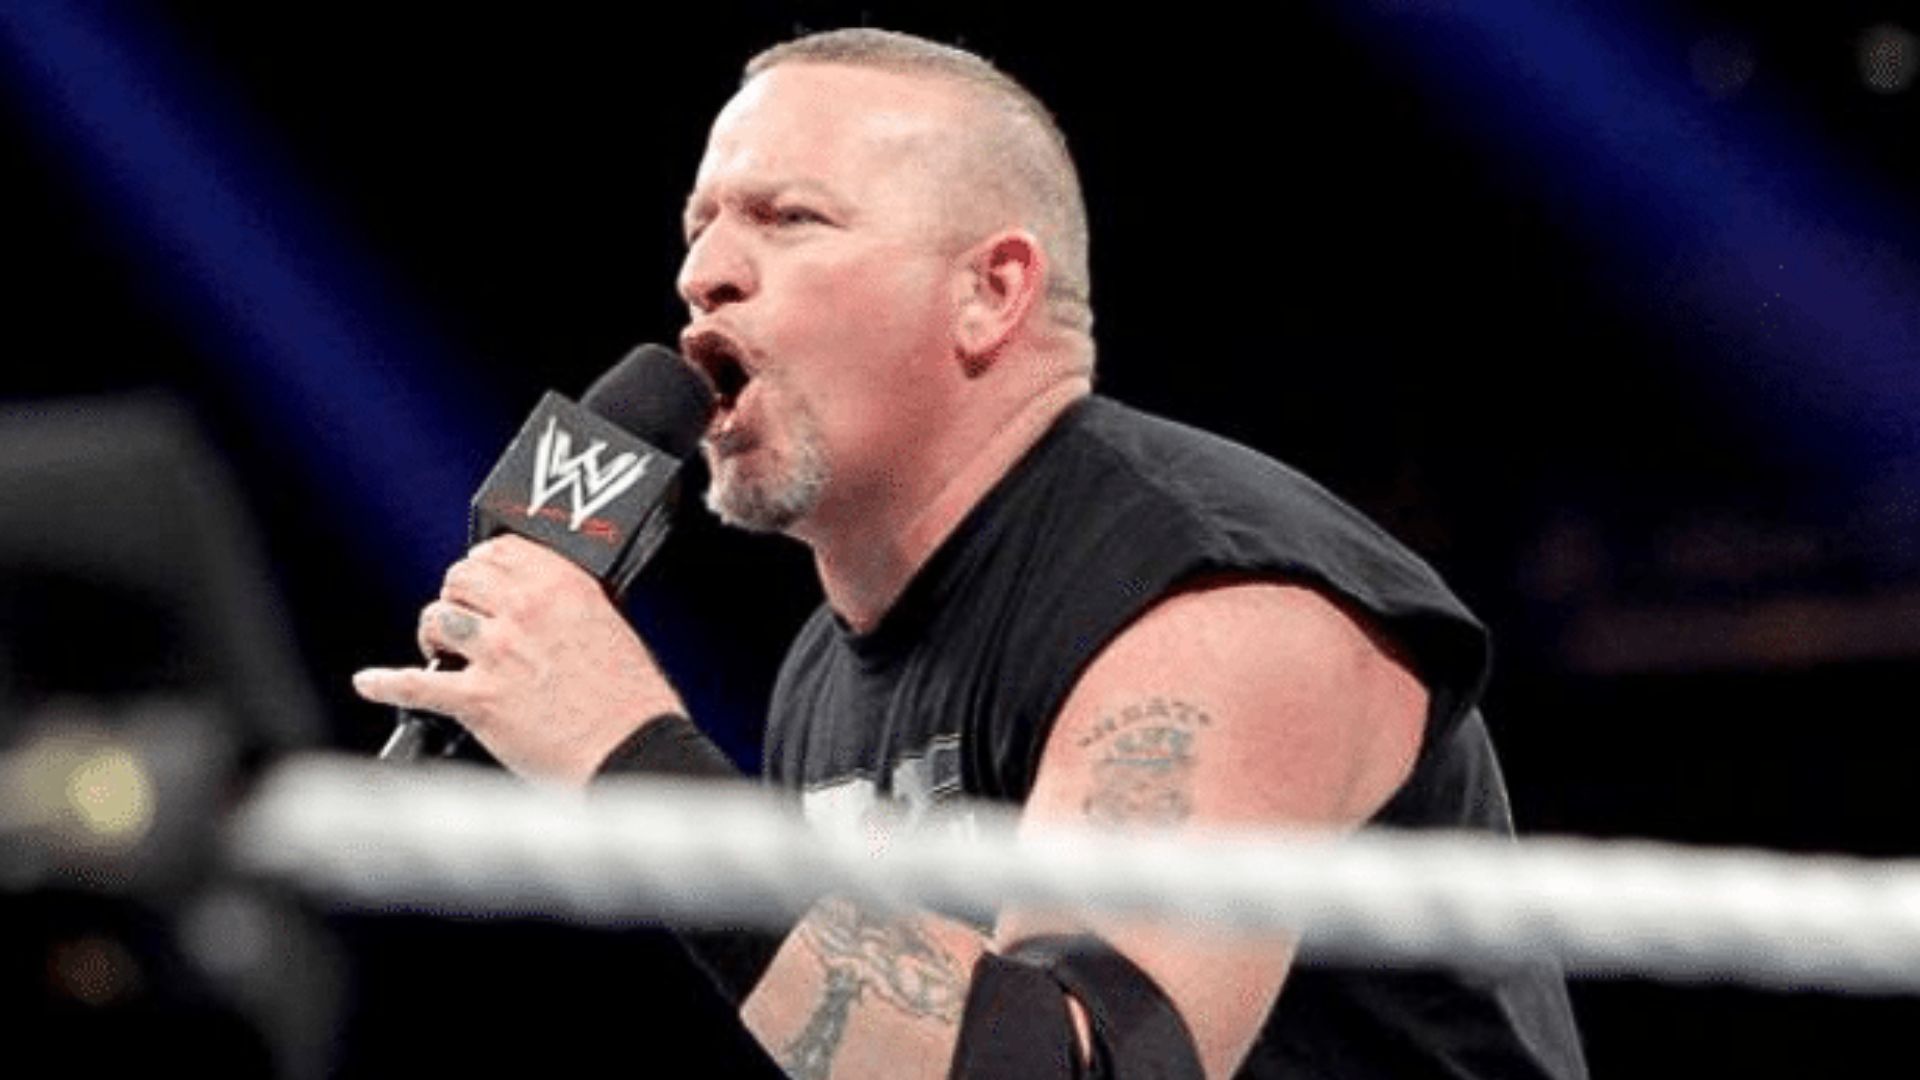 WWE Hall of Famer &quot;Road Dogg&quot; Brian James